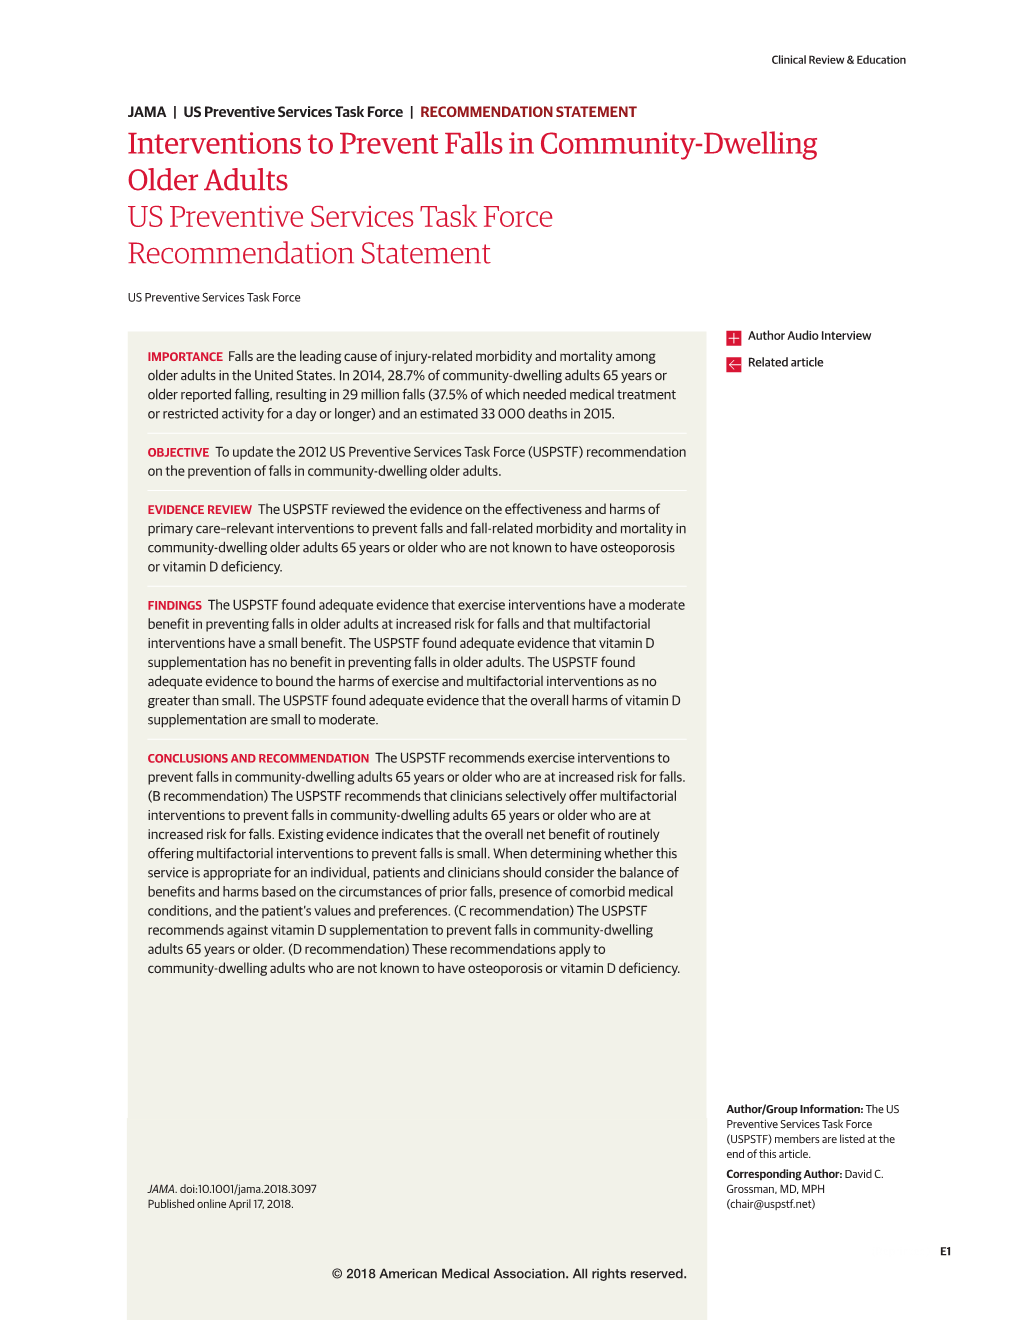 Interventions to Prevent Falls in Community-Dwelling Older Adults US Preventive Services Task Force Recommendation Statement